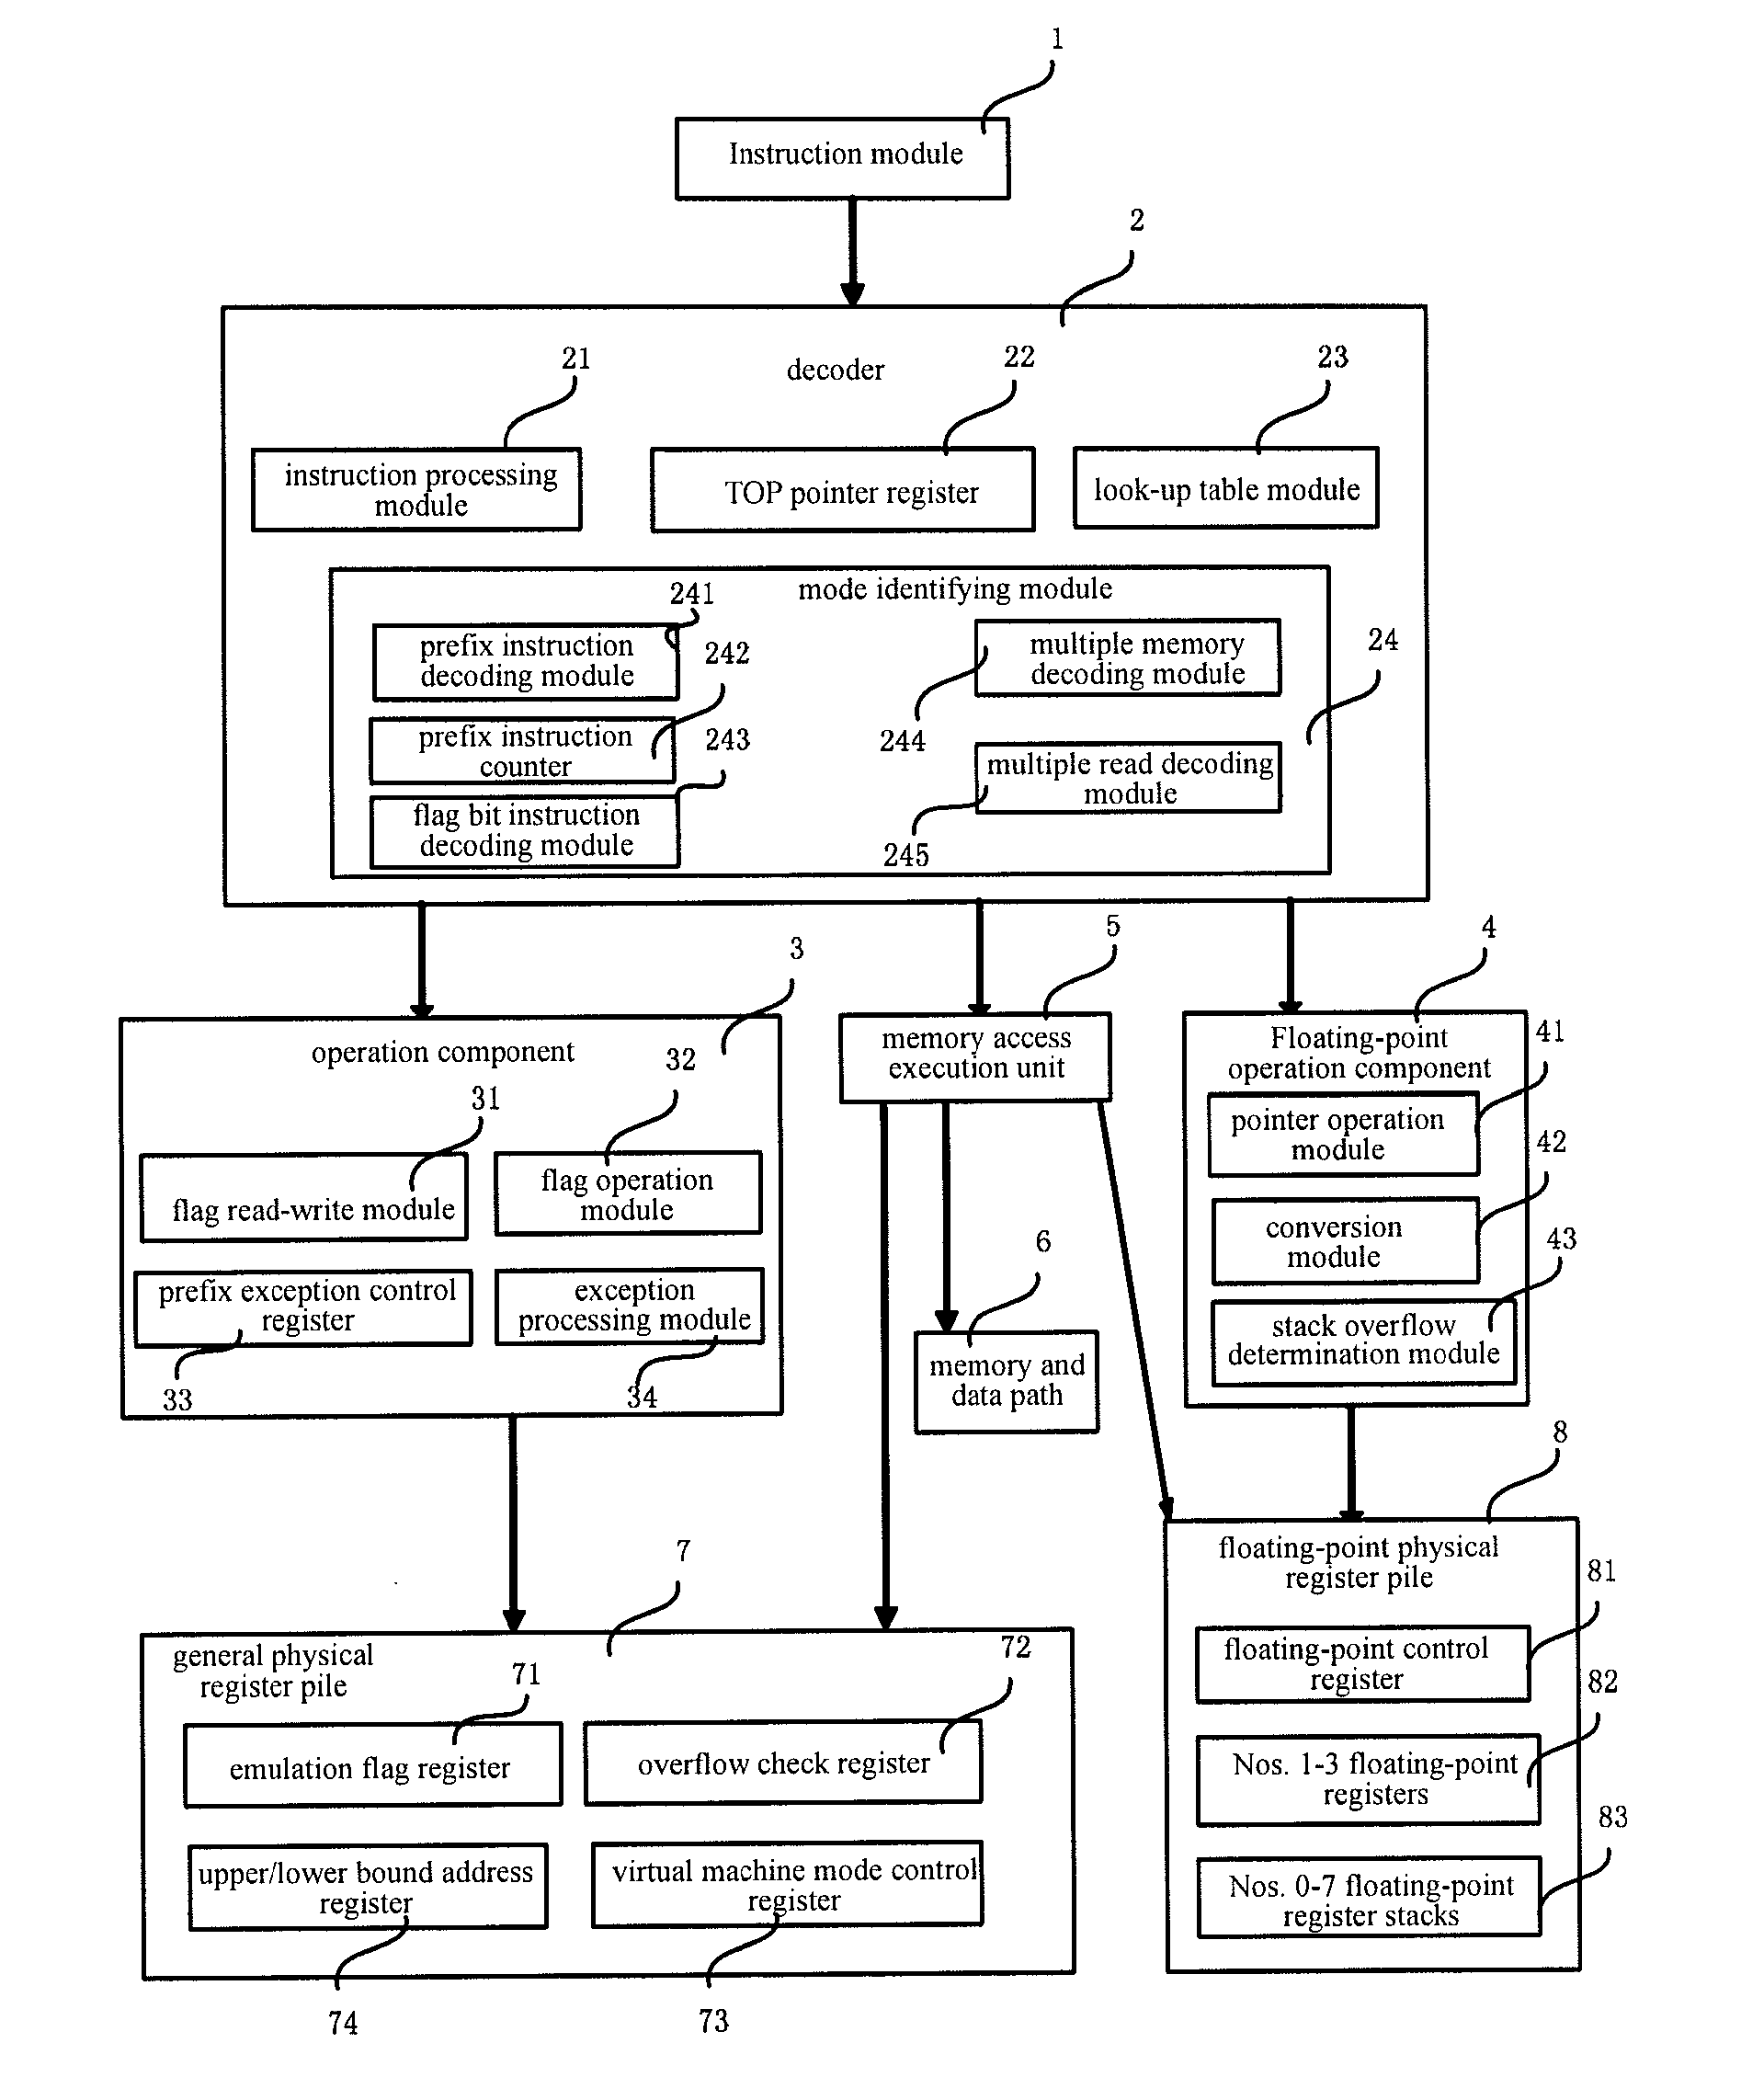 Risc processor apparatus and method for supporting x86 virtual machine